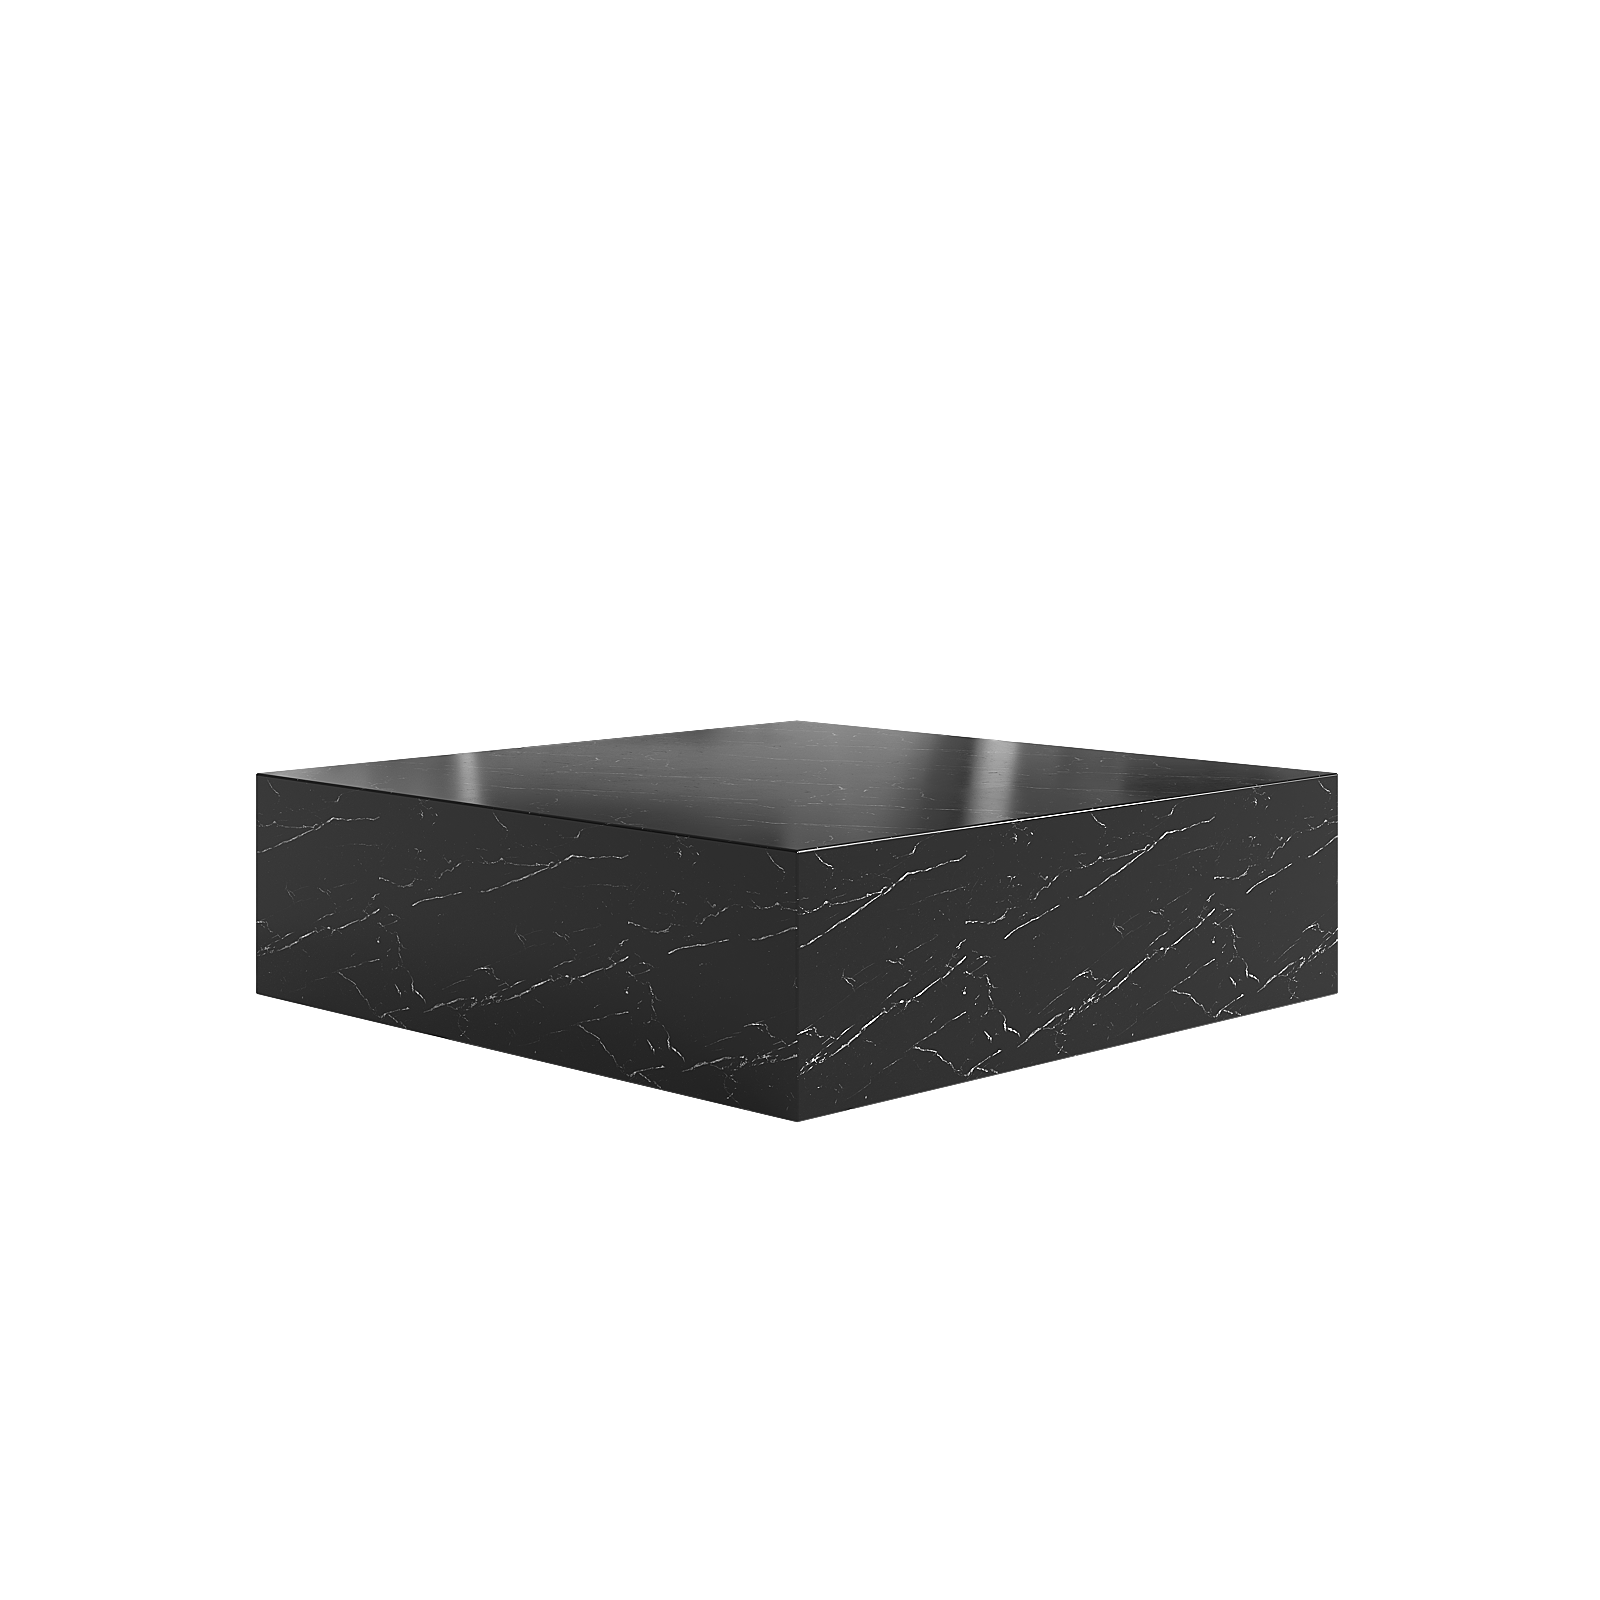 Sugar Cubes Coffee Table / Square - Black-And-White Marble - 900*900mm